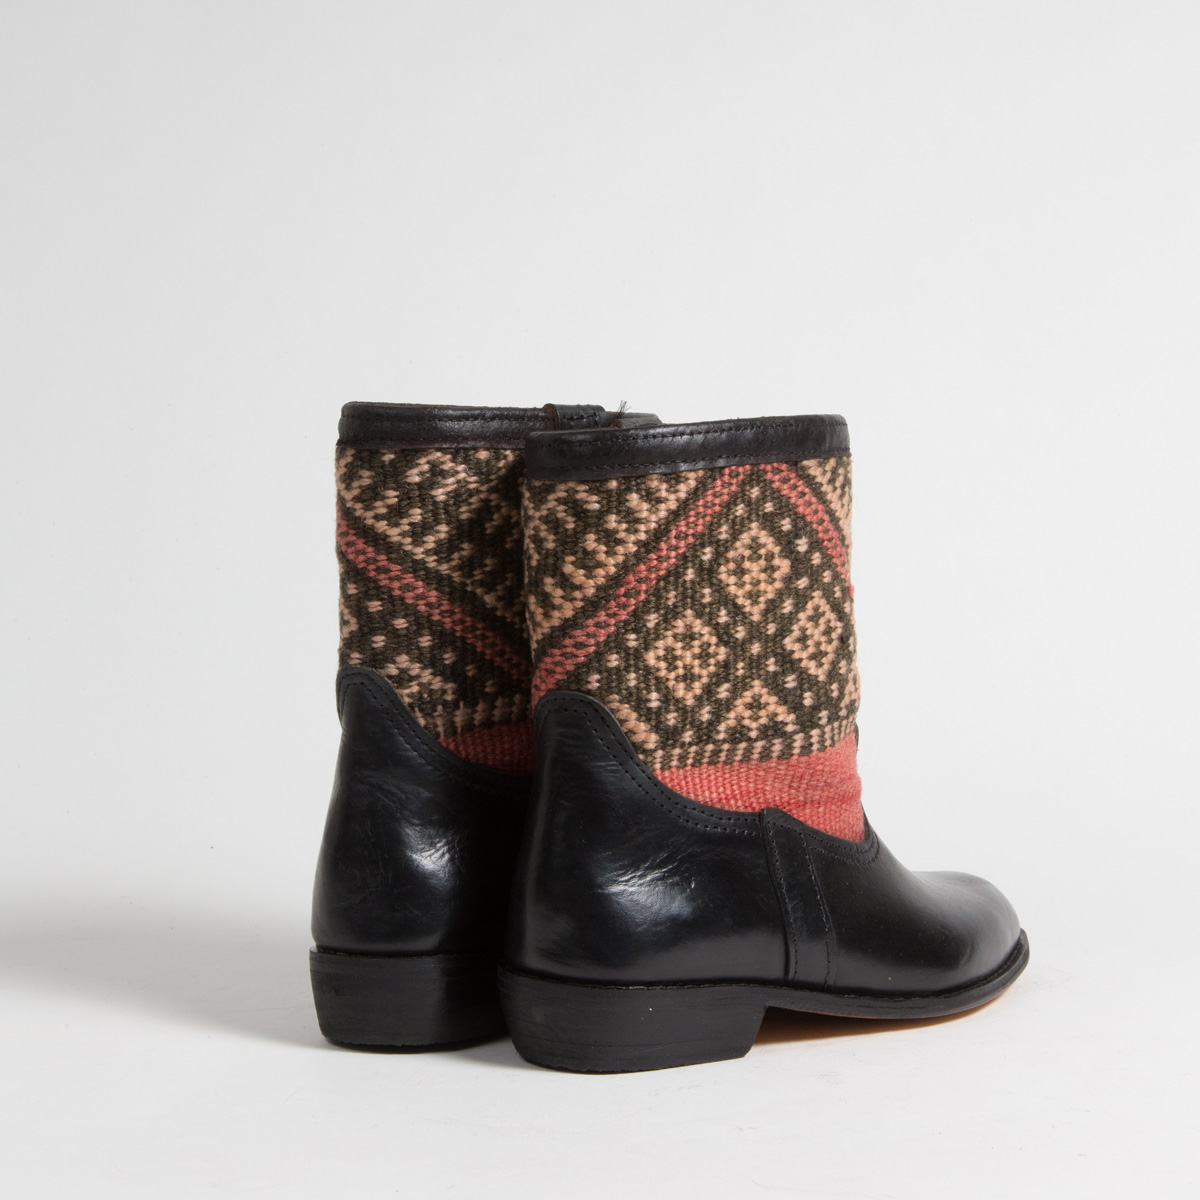 Bottines Kilim cuir mababouche artisanales (Réf. RPN8-38)